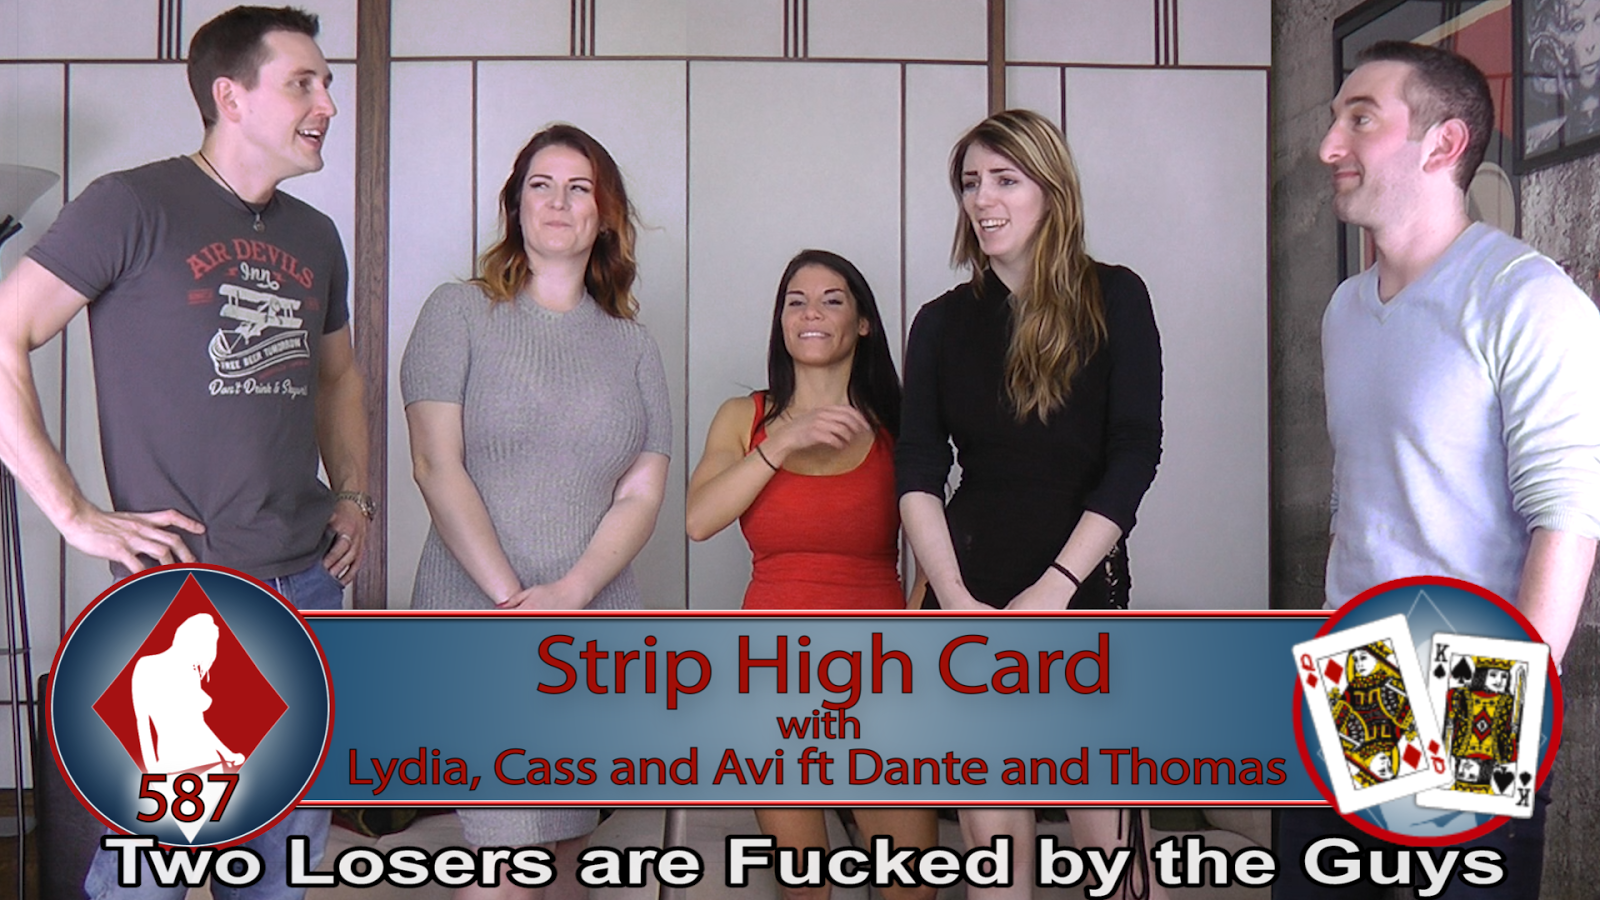 Lost bet cards Porno image top rated